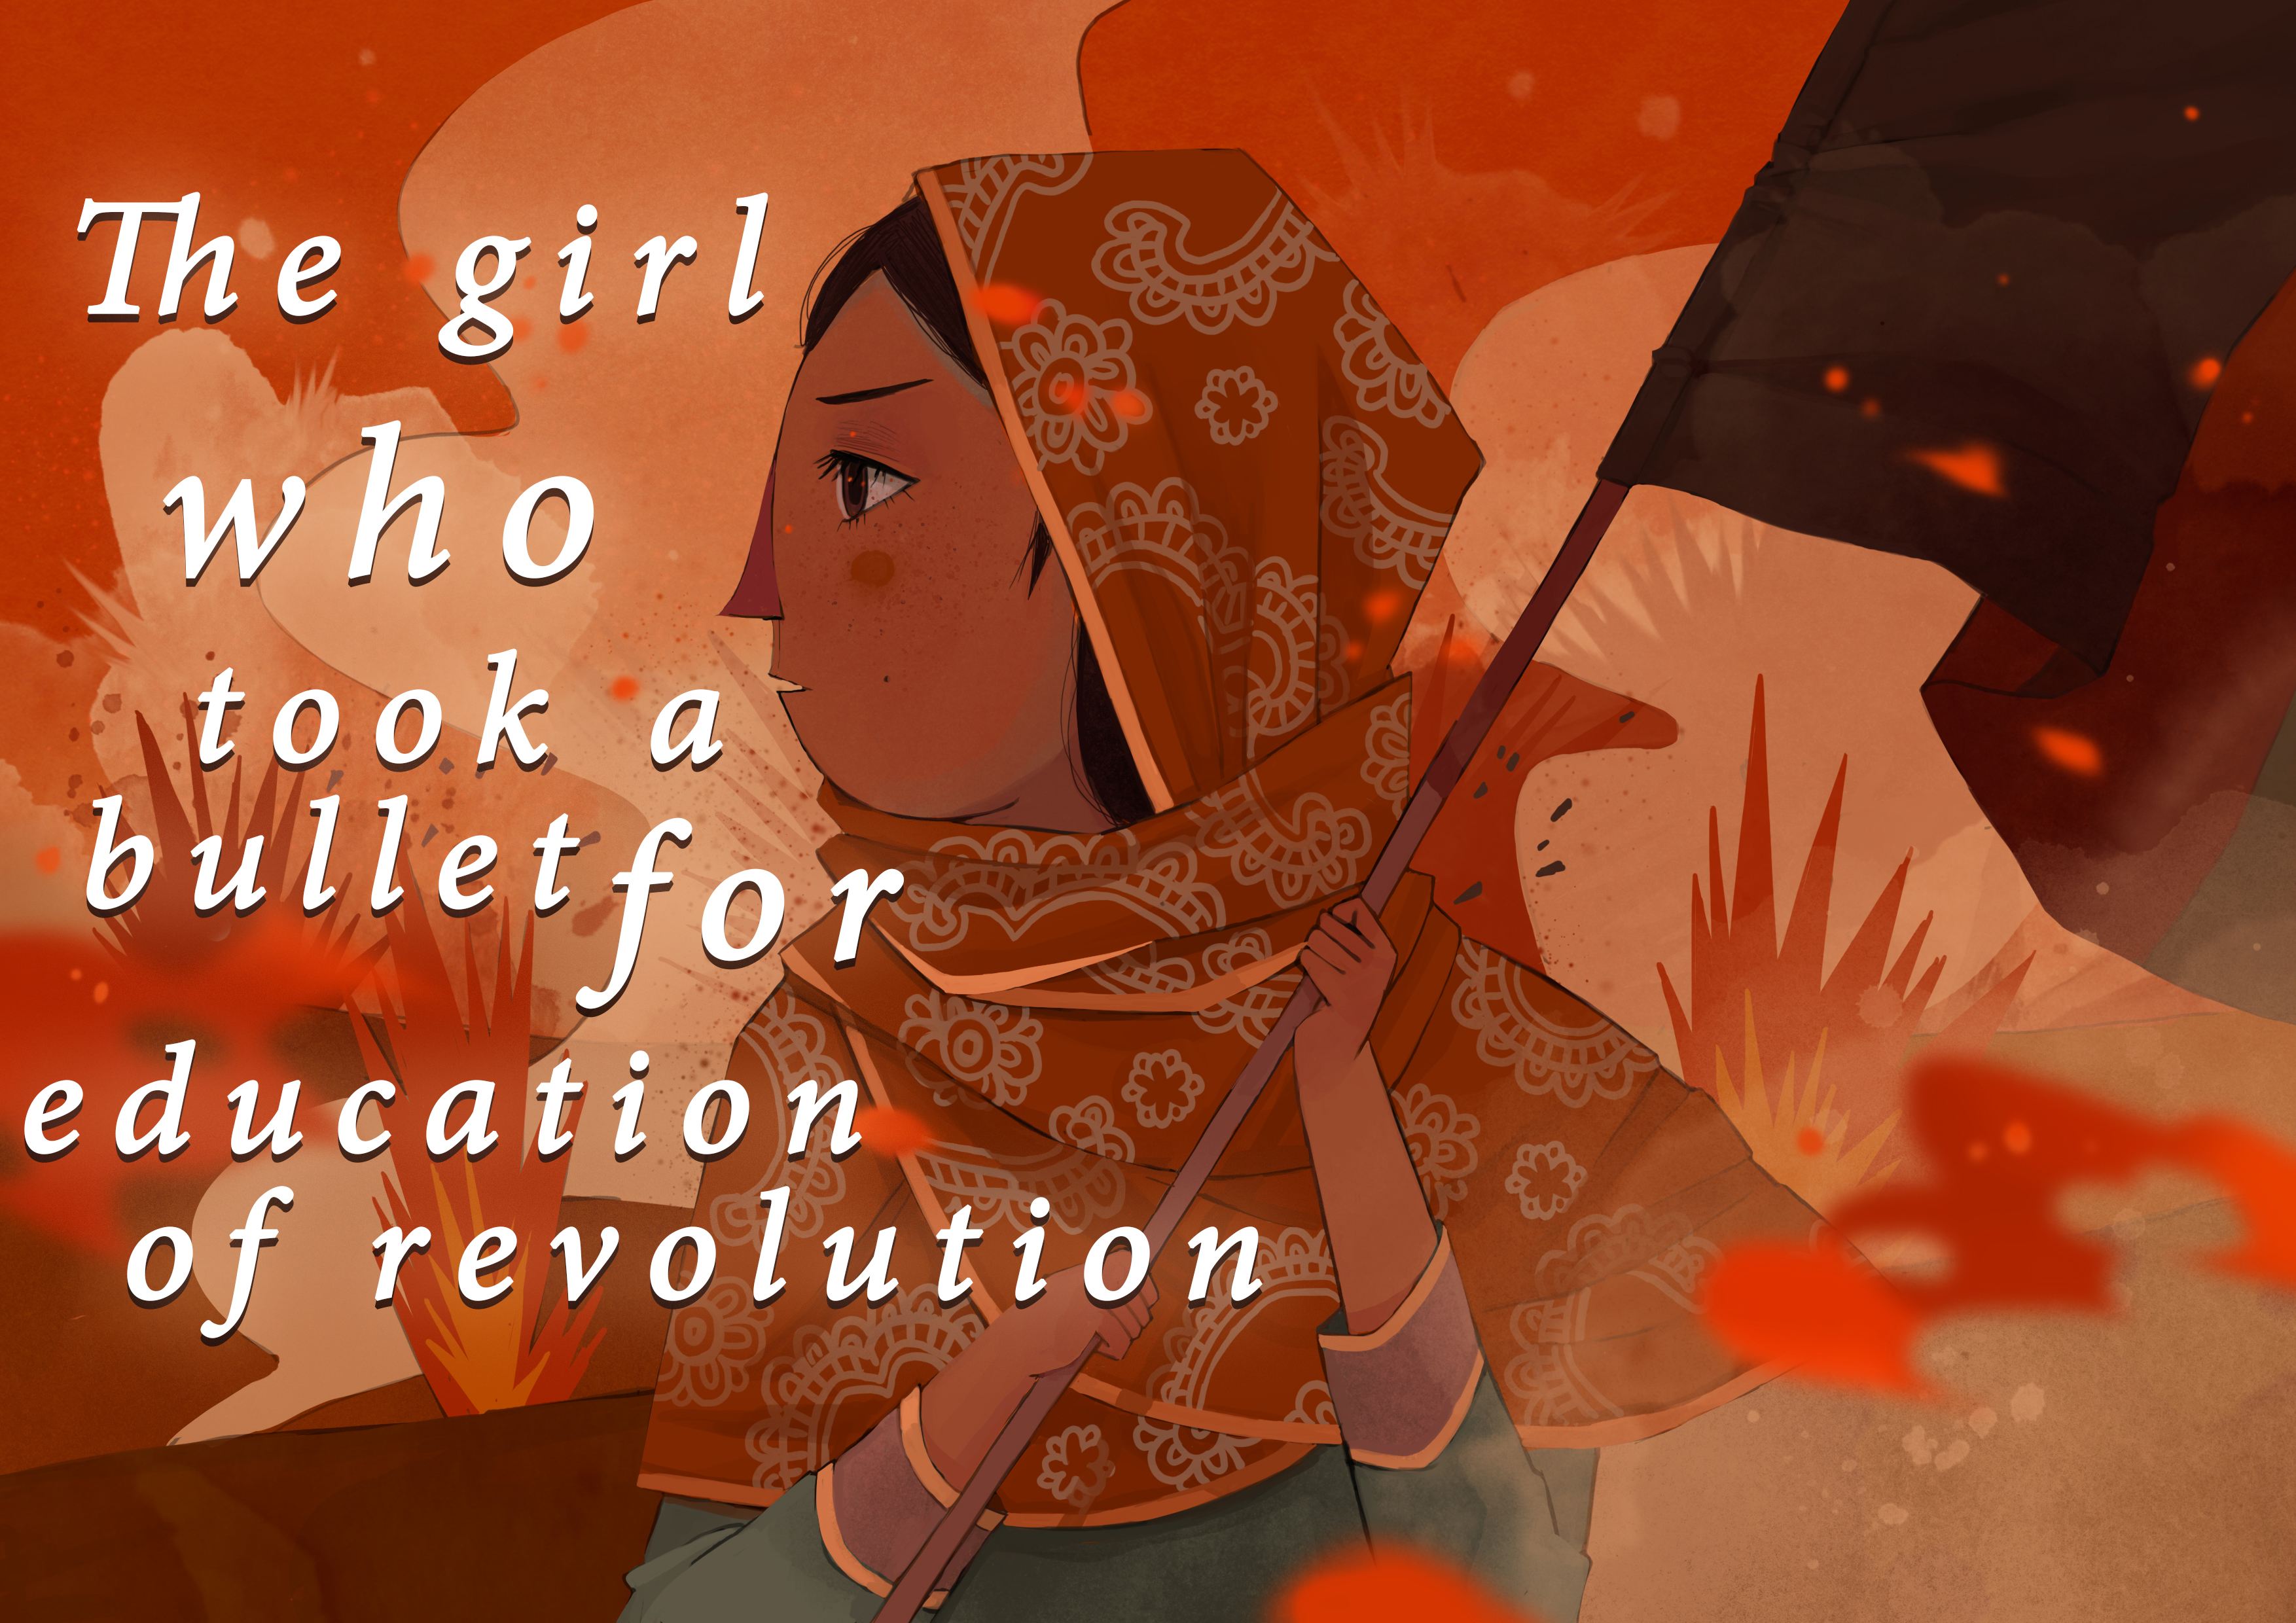 The girl who took a bullet for education of revolution